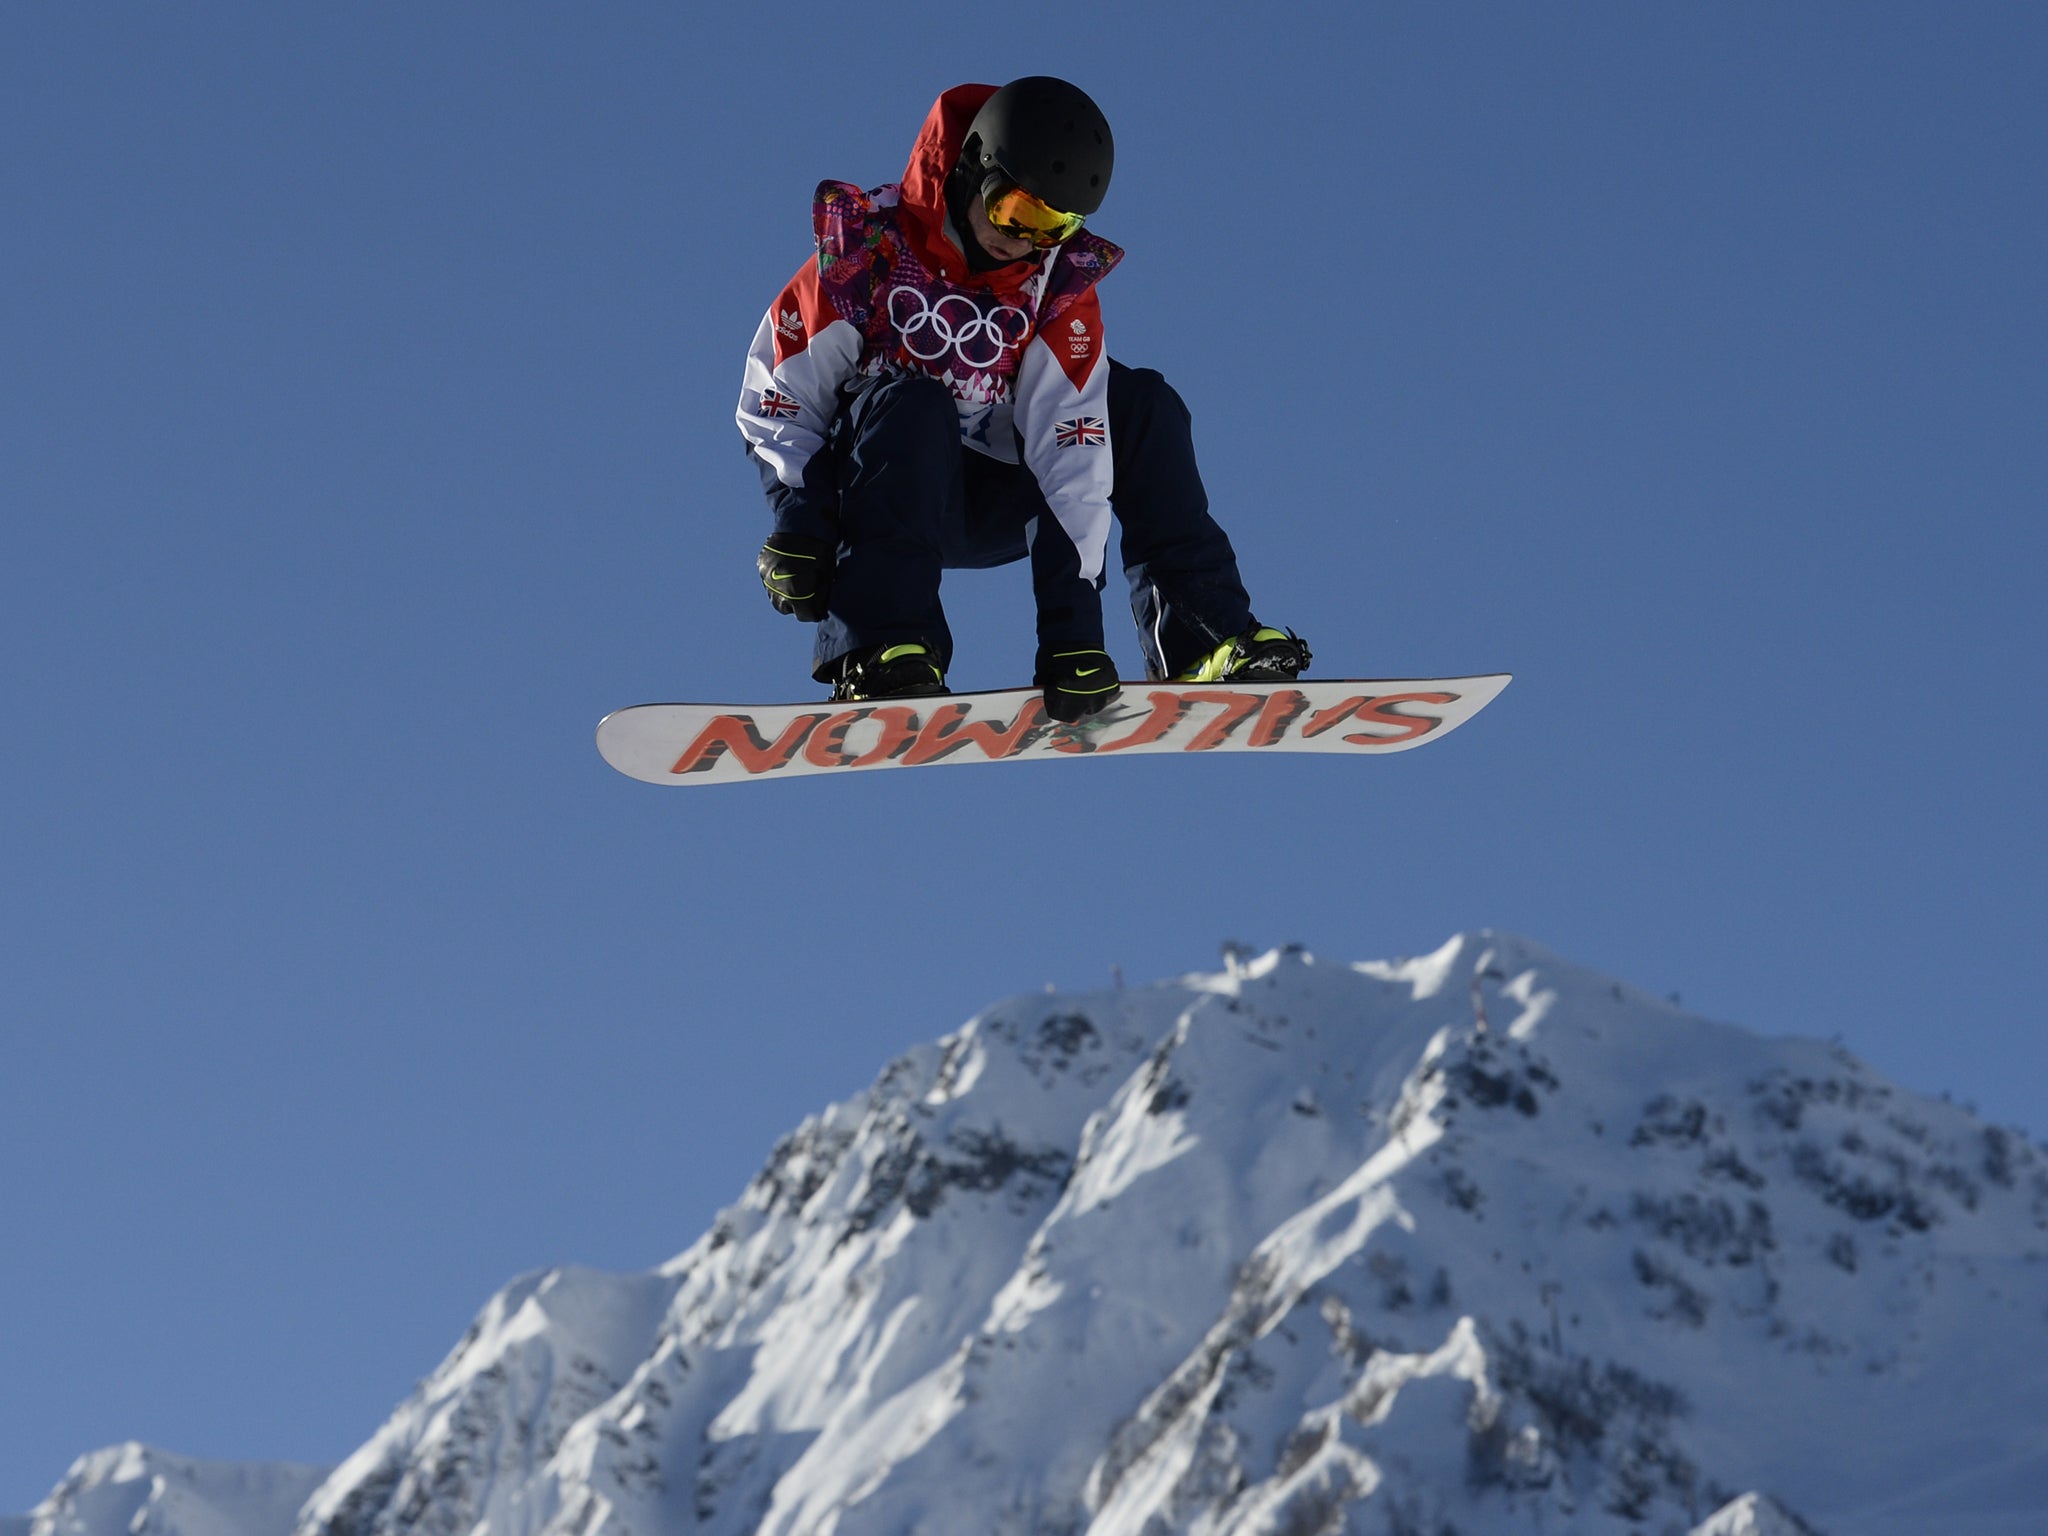 Jamie Nicholls was pleased with his performance in the final of the snowboard slopestyle despite missing out on a medal as he finished sixth